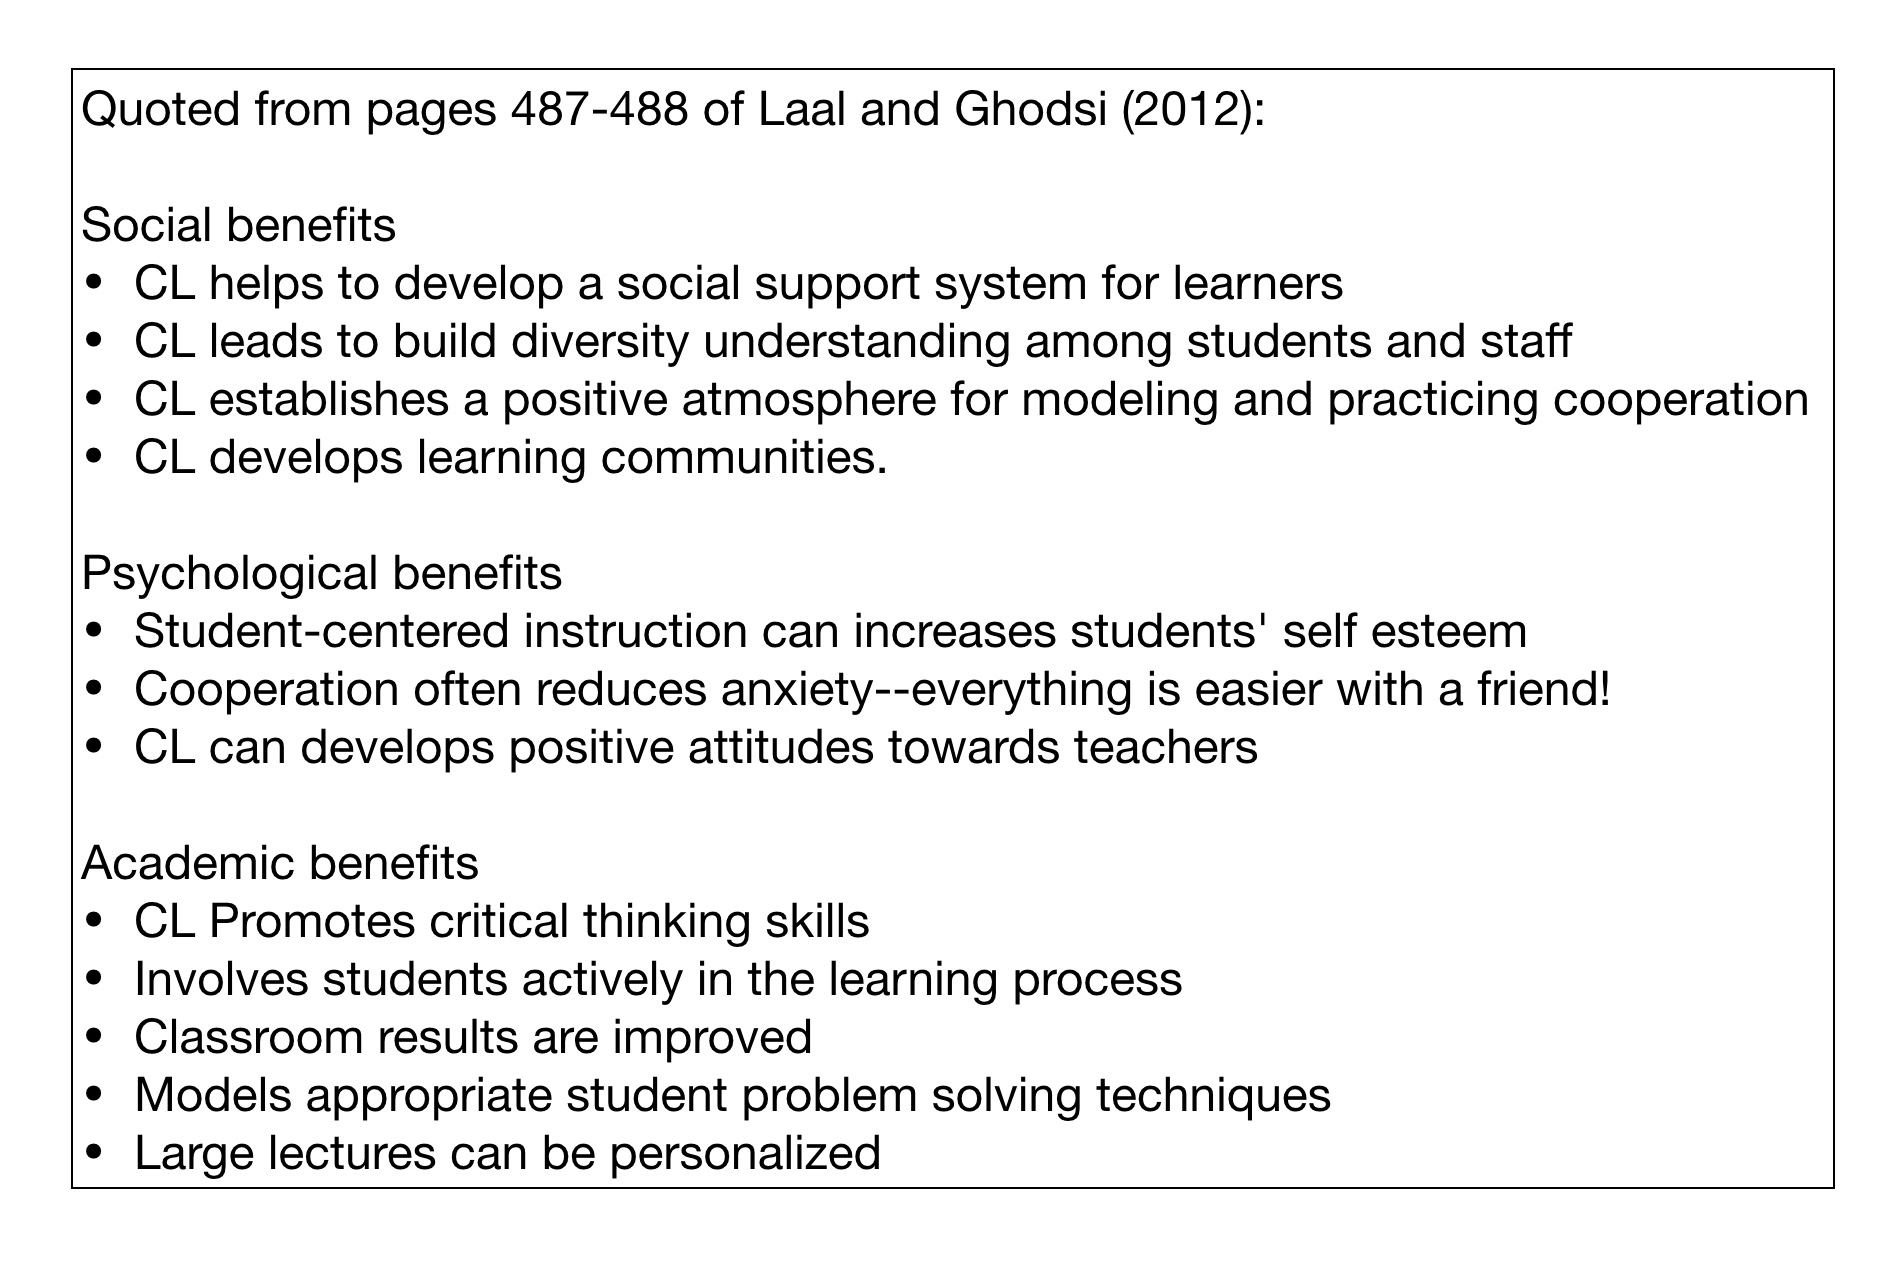 Quoted from pages 487-488 of Laal and Ghodsi (2012): Social benefits CL helps to develop a social support system for learners CL leads to build diversity understanding among students and staff CL establishes a positive atmosphere for modelling and practicing cooperation CL develops learning communities. Psychological benefits Student-centered instruction can increases students' self esteem Cooperation often reduces anxiety--everything is easier with a friend! CL can develops positive attitudes towards teachers Academic benefits CL Promotes critical thinking skills Involves students actively in the learning process Classroom results are improved Models appropriate student problem solving techniques Large lectures can be personalized 